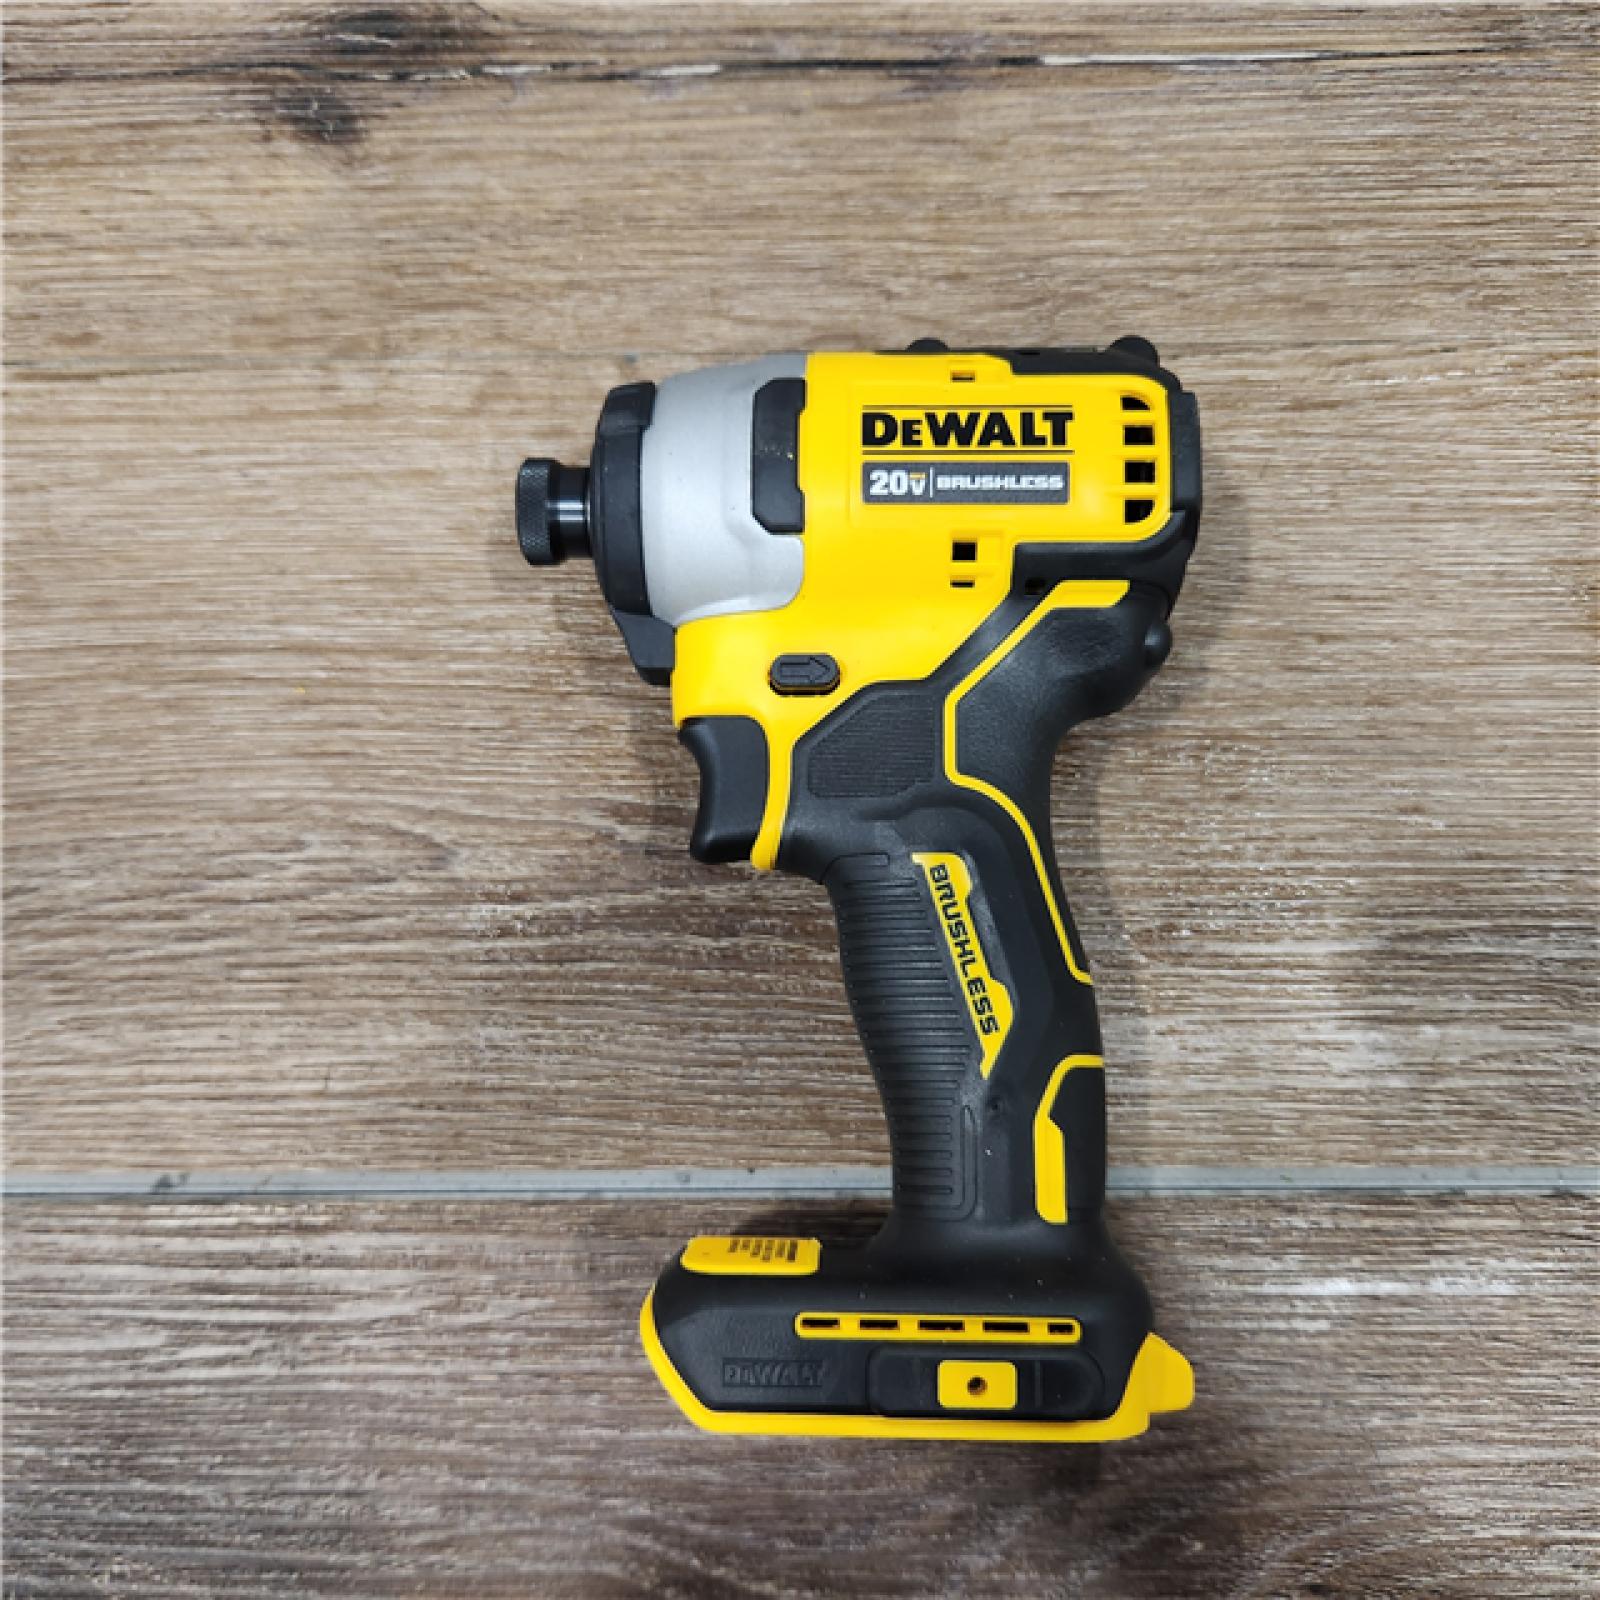 AS-IS DeWalt 20V MAX ATOMIC Cordless Brushless 2 Tool Compact Drill and Impact Driver Kit not include drill